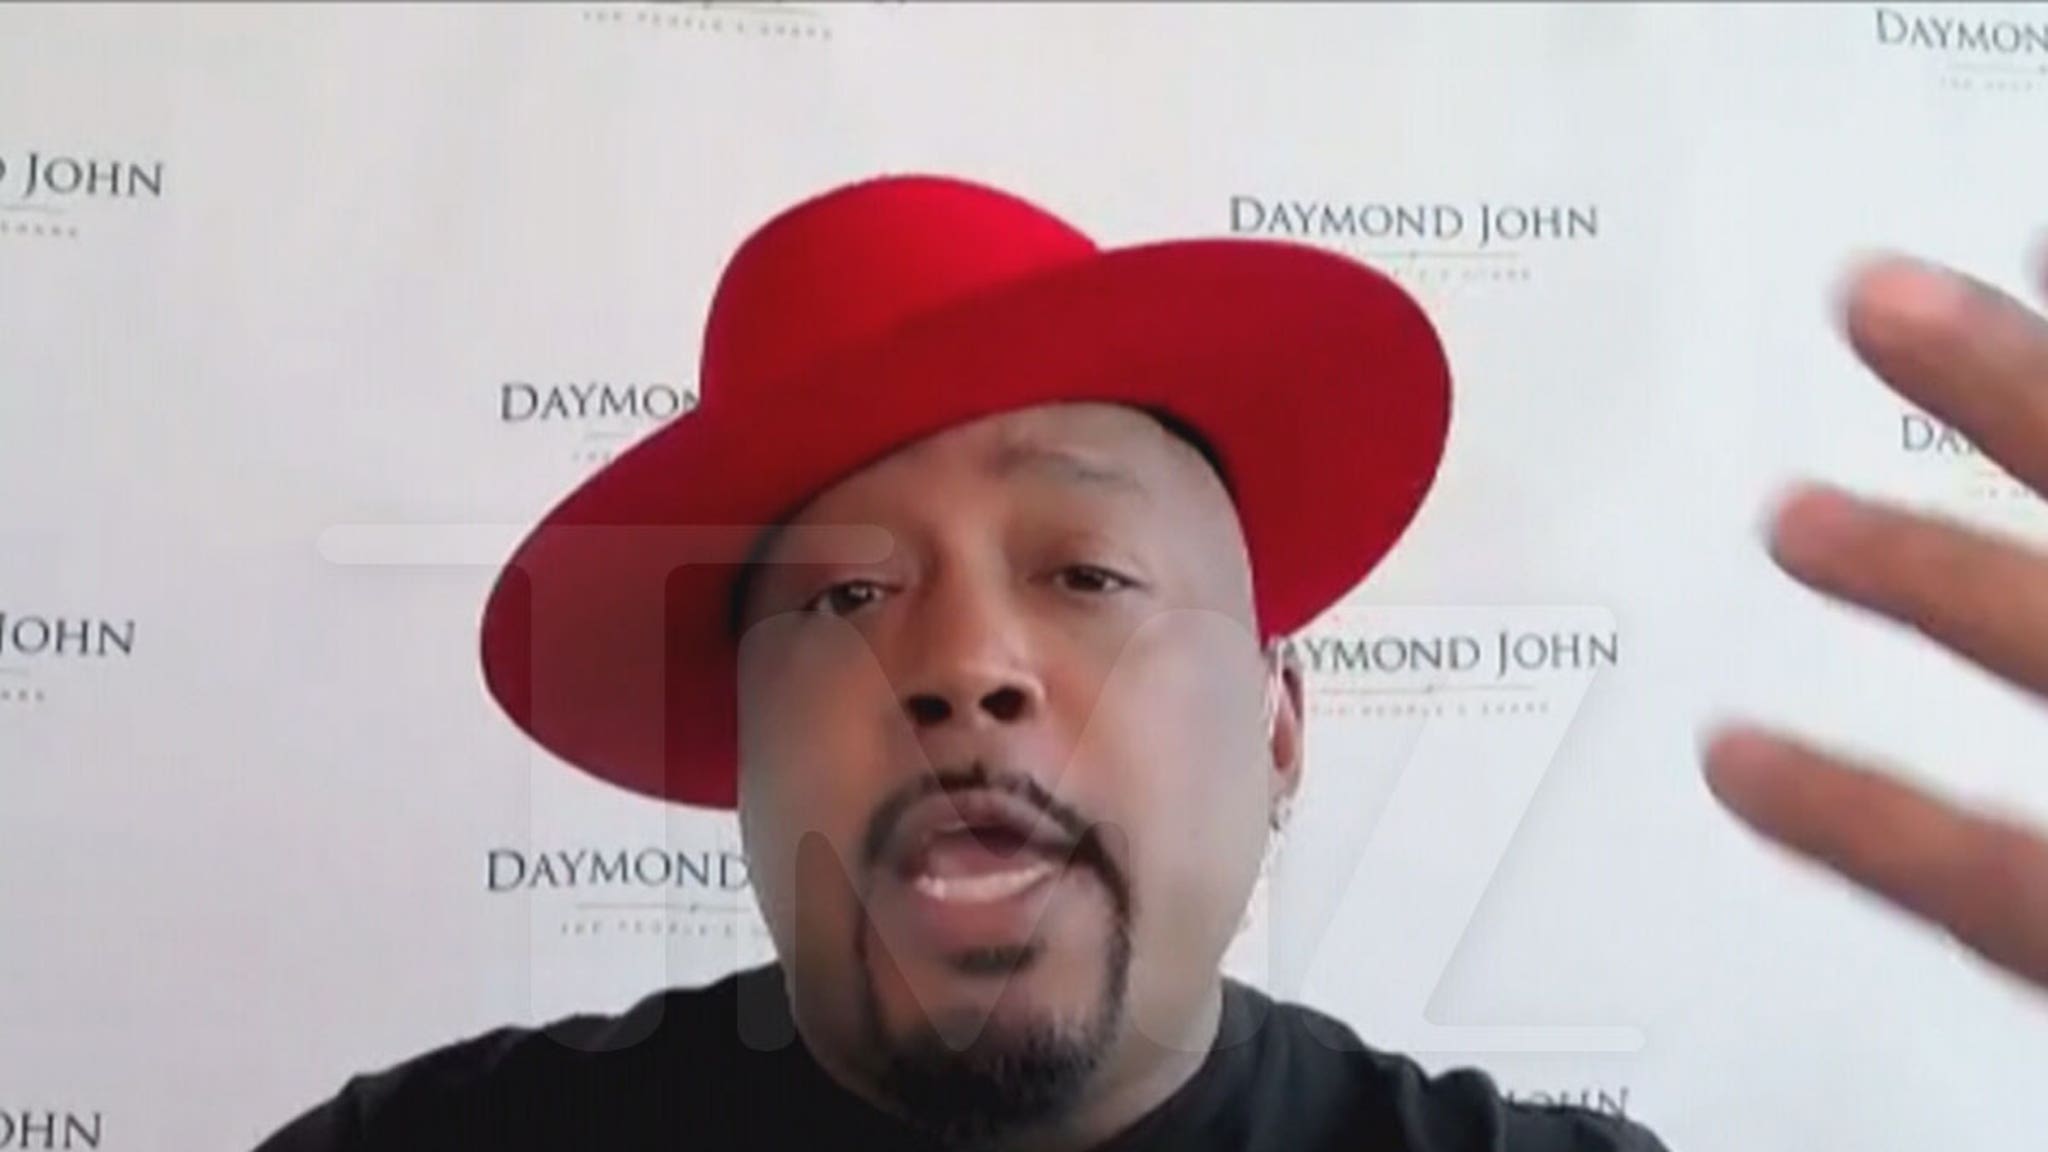 Cardi B Partnering with Playboy is Smart Business Move, Says Daymond John thumbnail